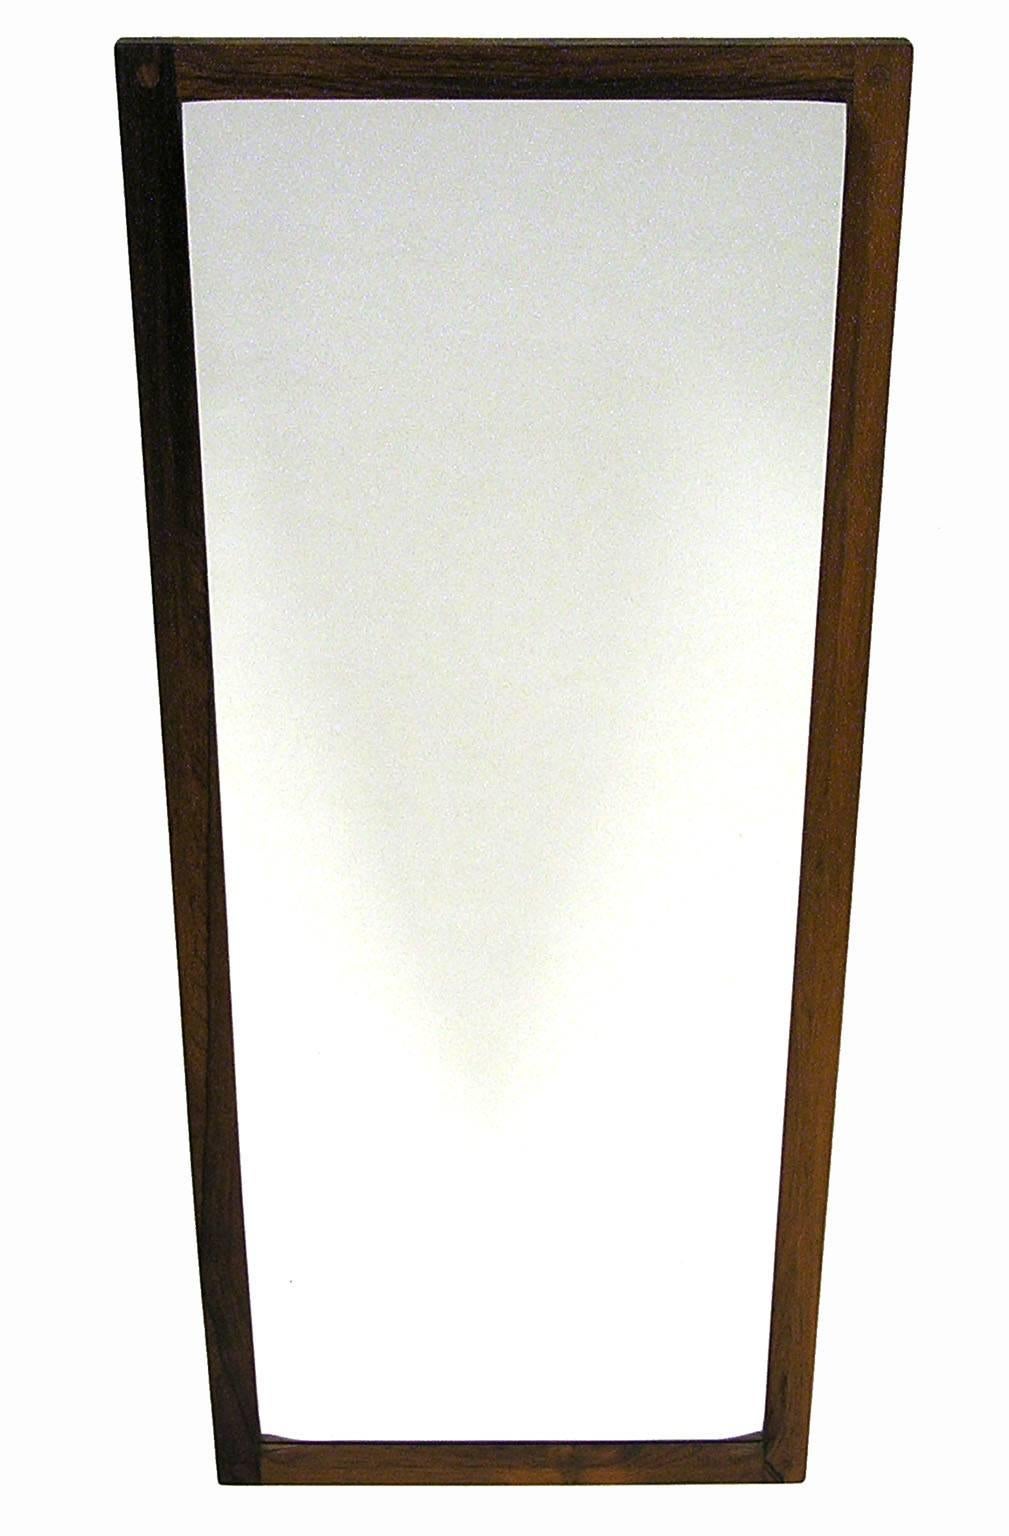 A gorgeous rosewood wall mirror from the 1960s Mid-Century Modern era by Aksel Kjersgaard of Denmark. Features a solid rosewood frame with a sculpted inner edge and attractive corner joinery. Frame is in excellent overall shape. Upon close